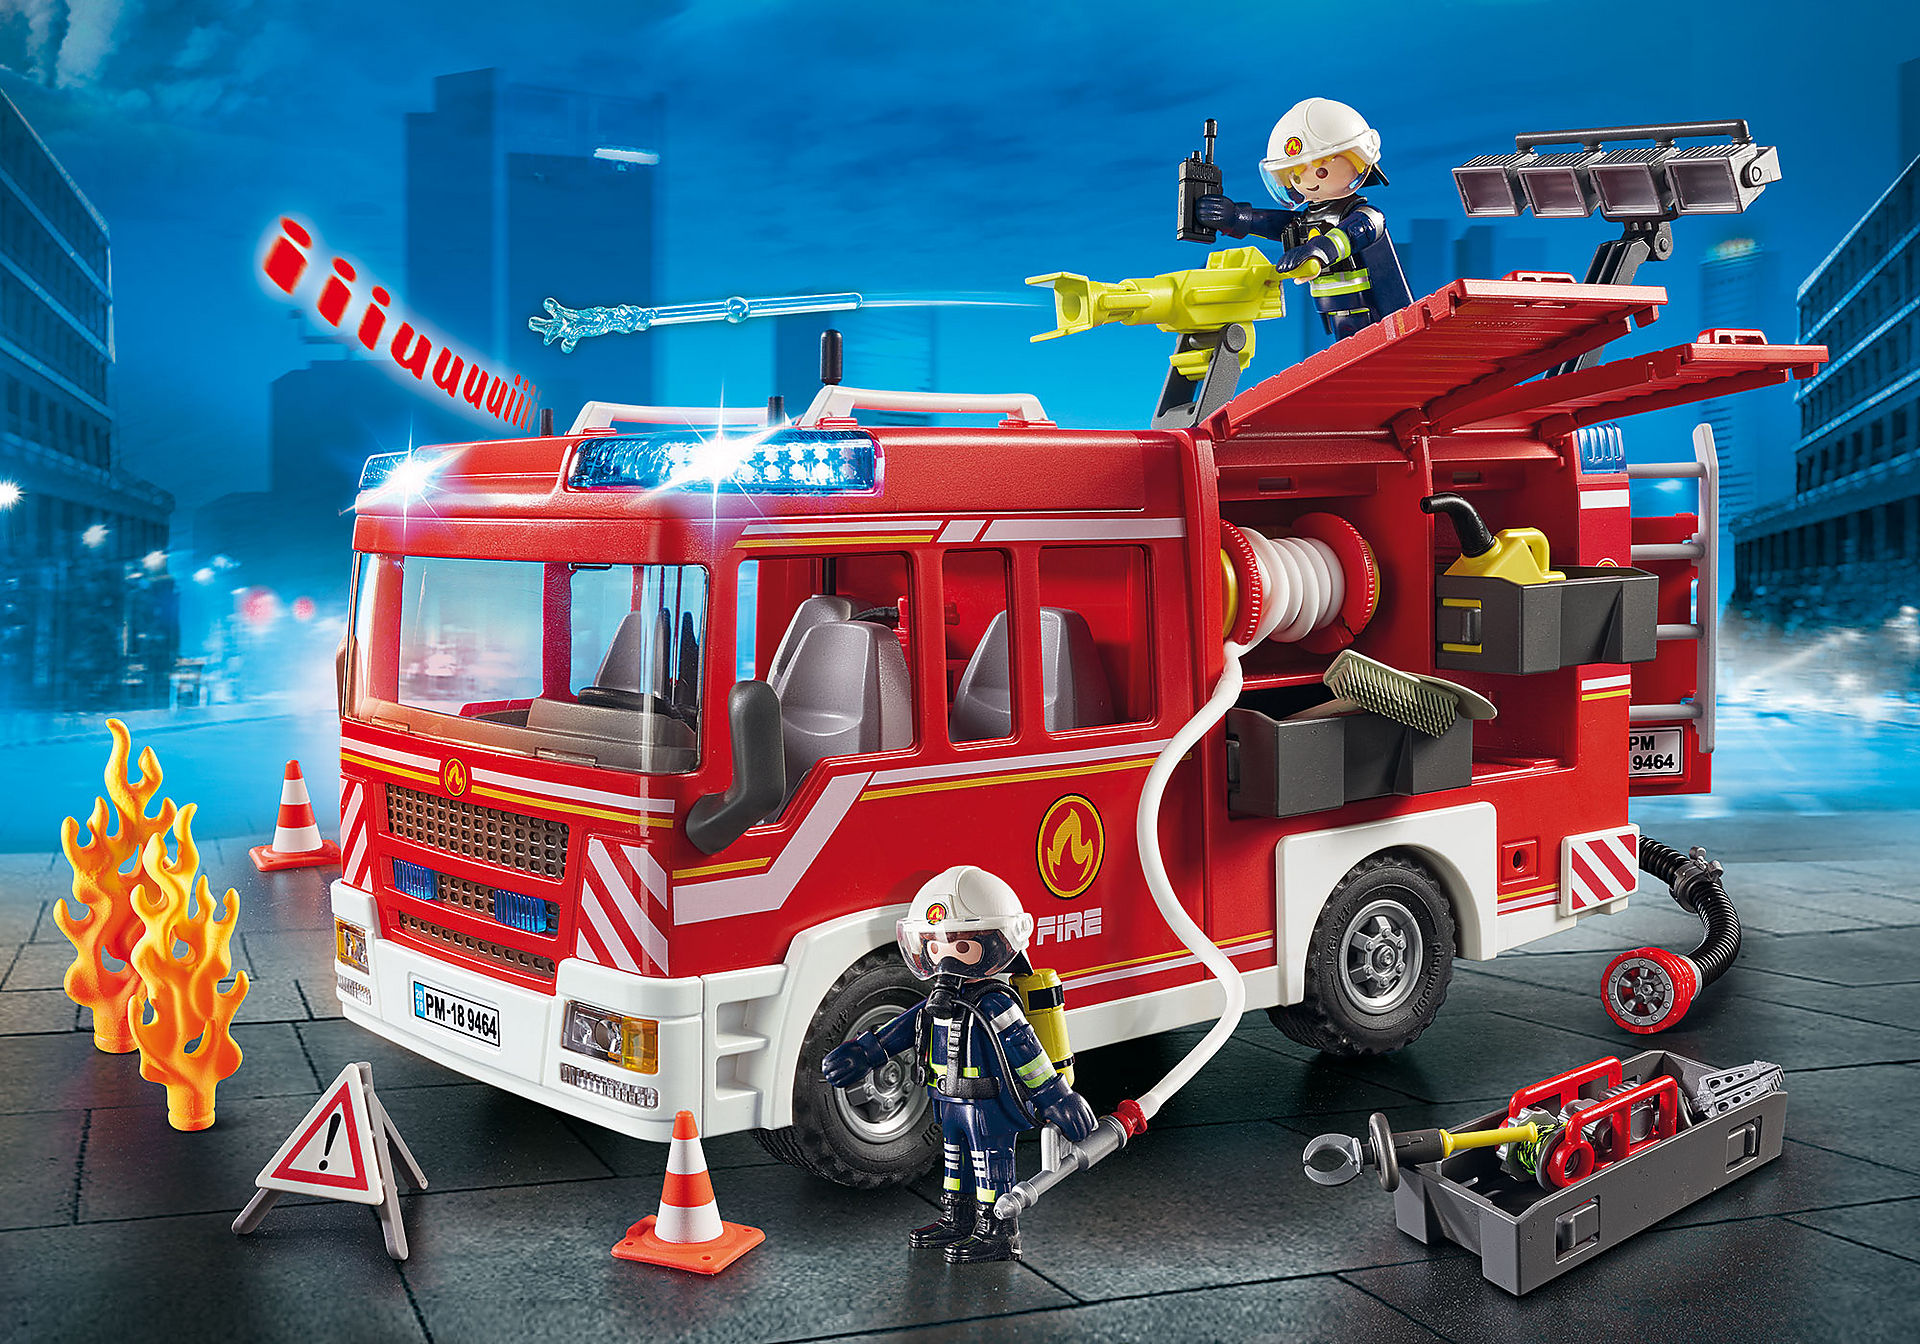 playmobil city action fire truck